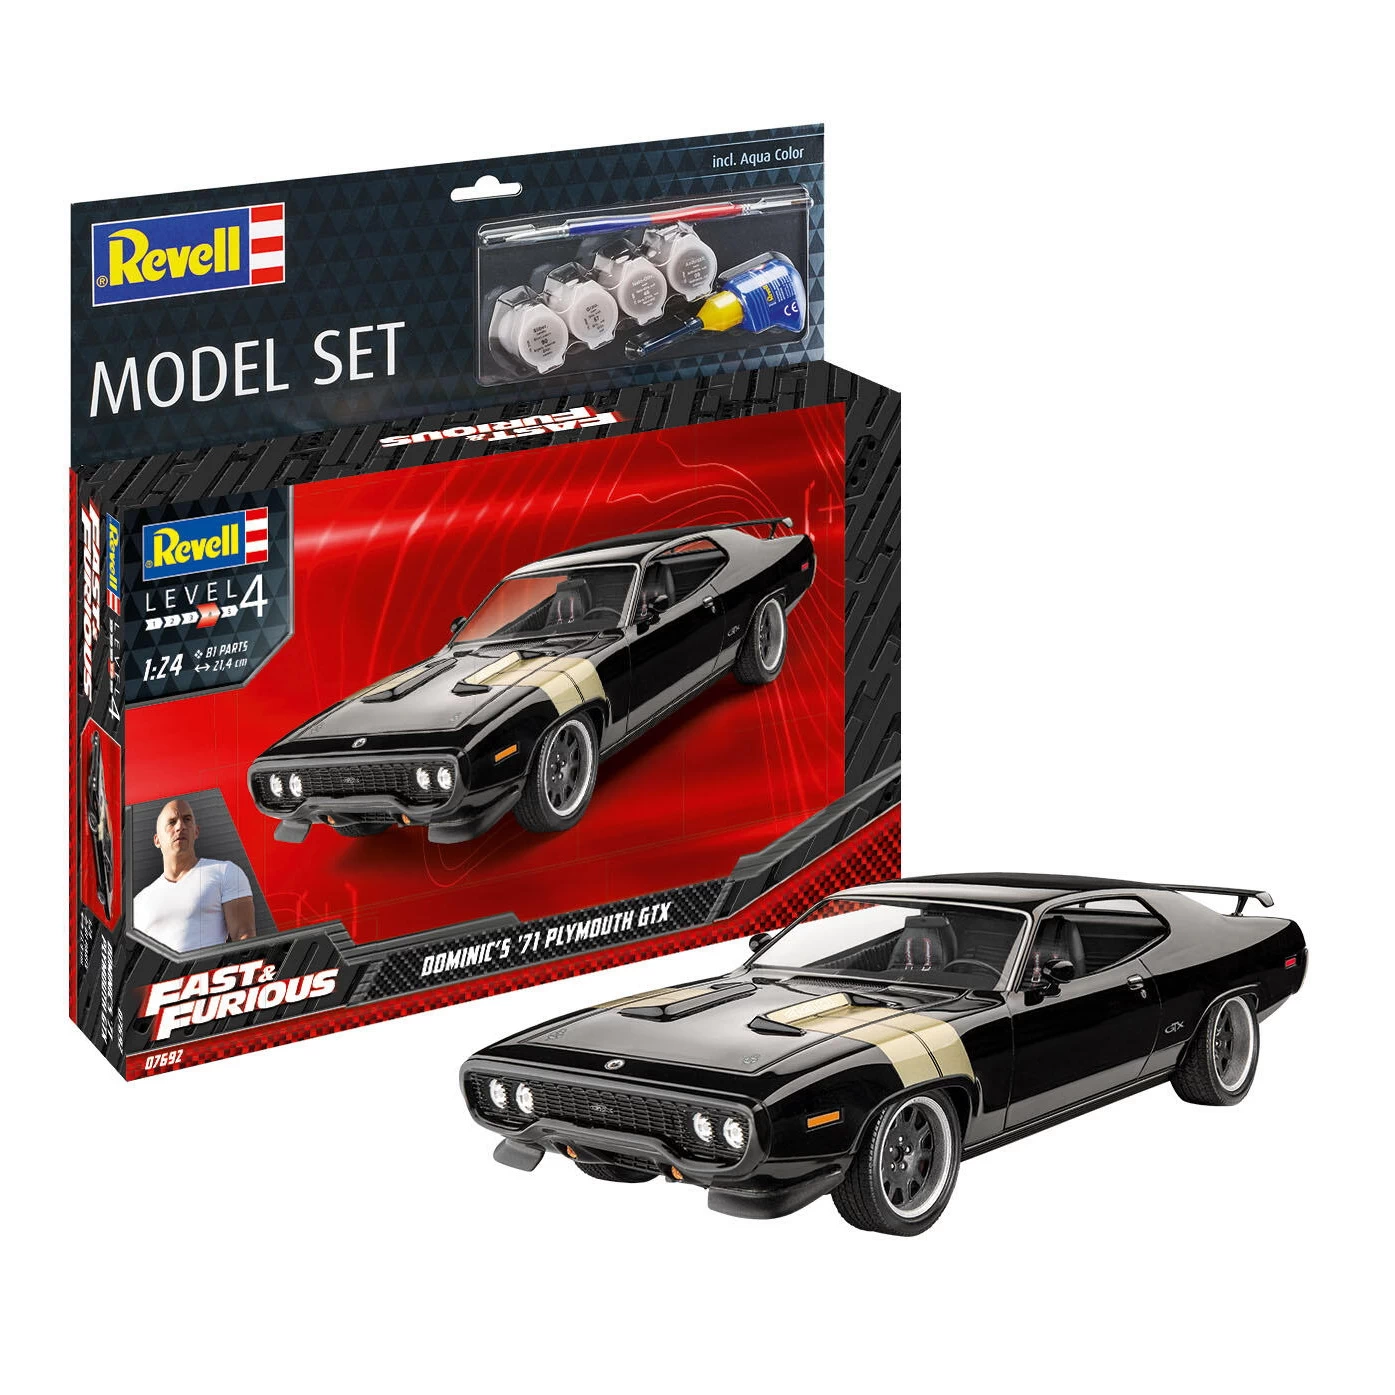 Revell 67692 - Model Set Fast & Furious - Dominics 1971 Plymouth GTX